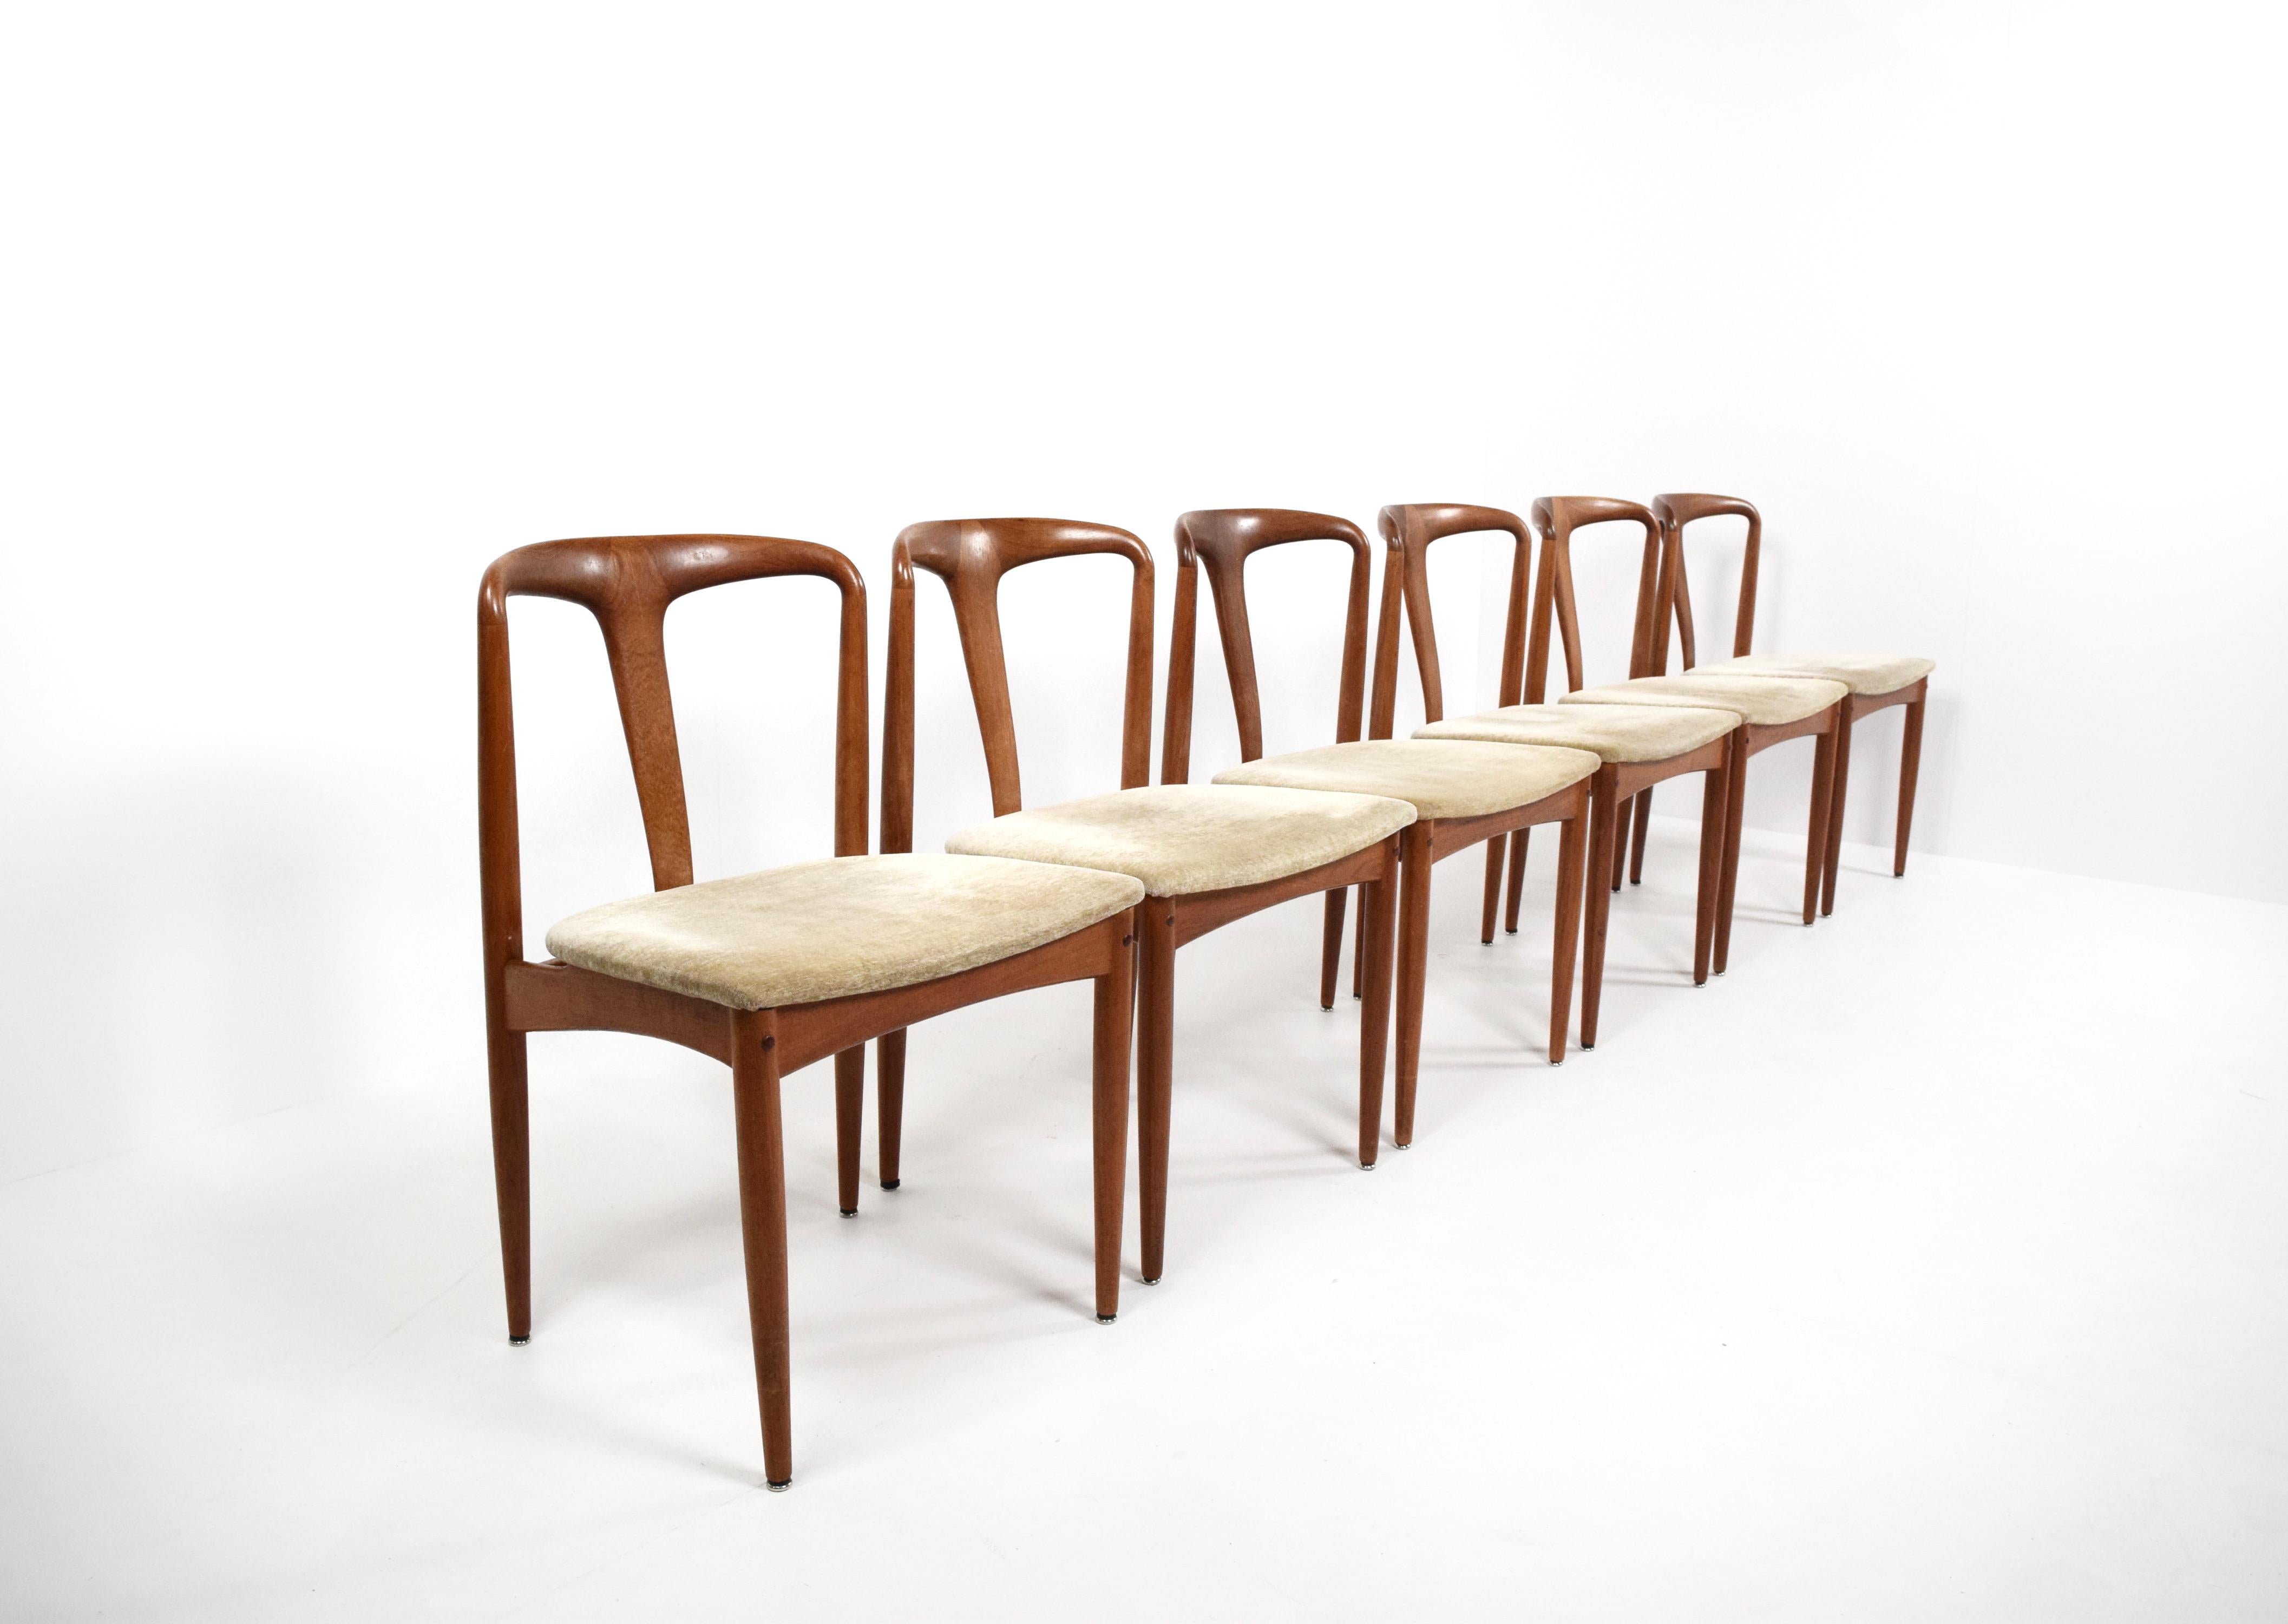 Set of Six Johannes Andersen 'Juliane' Dining Chairs for Uldum Møbelfabrik from Denmark 1960's. These chairs in teak have a timeless design and are in original condition with the original fabric. The curved shapes make make it a light and elegant